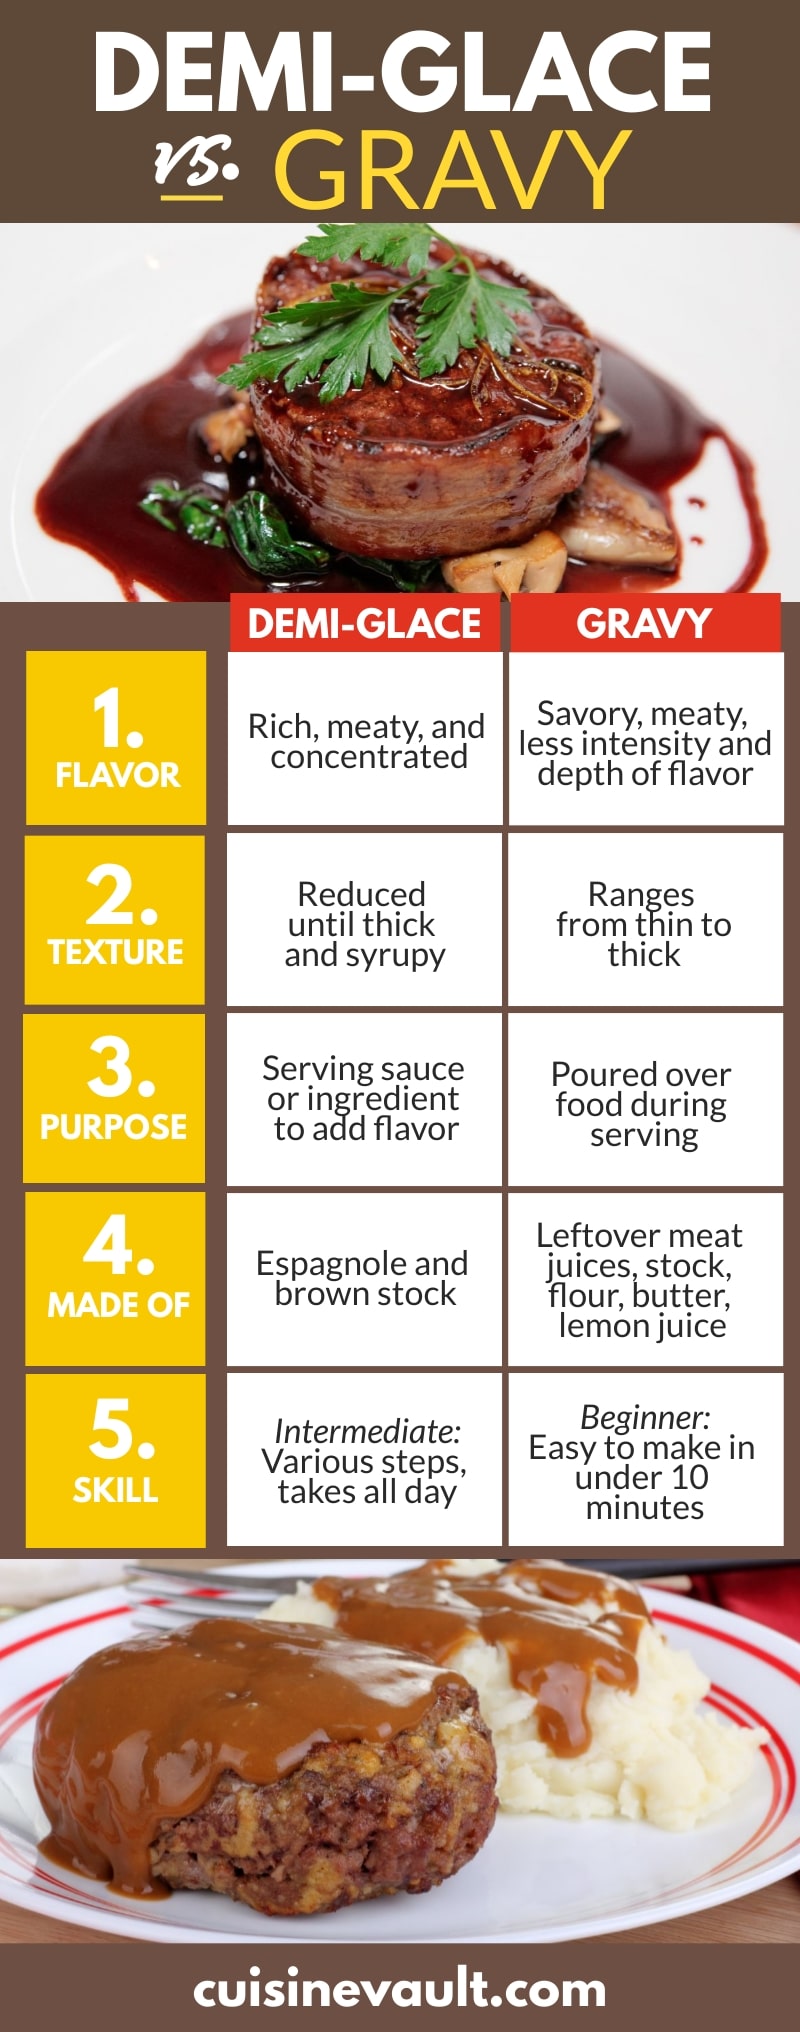 An infographic comparison summary of gravy and demi-glace sauces